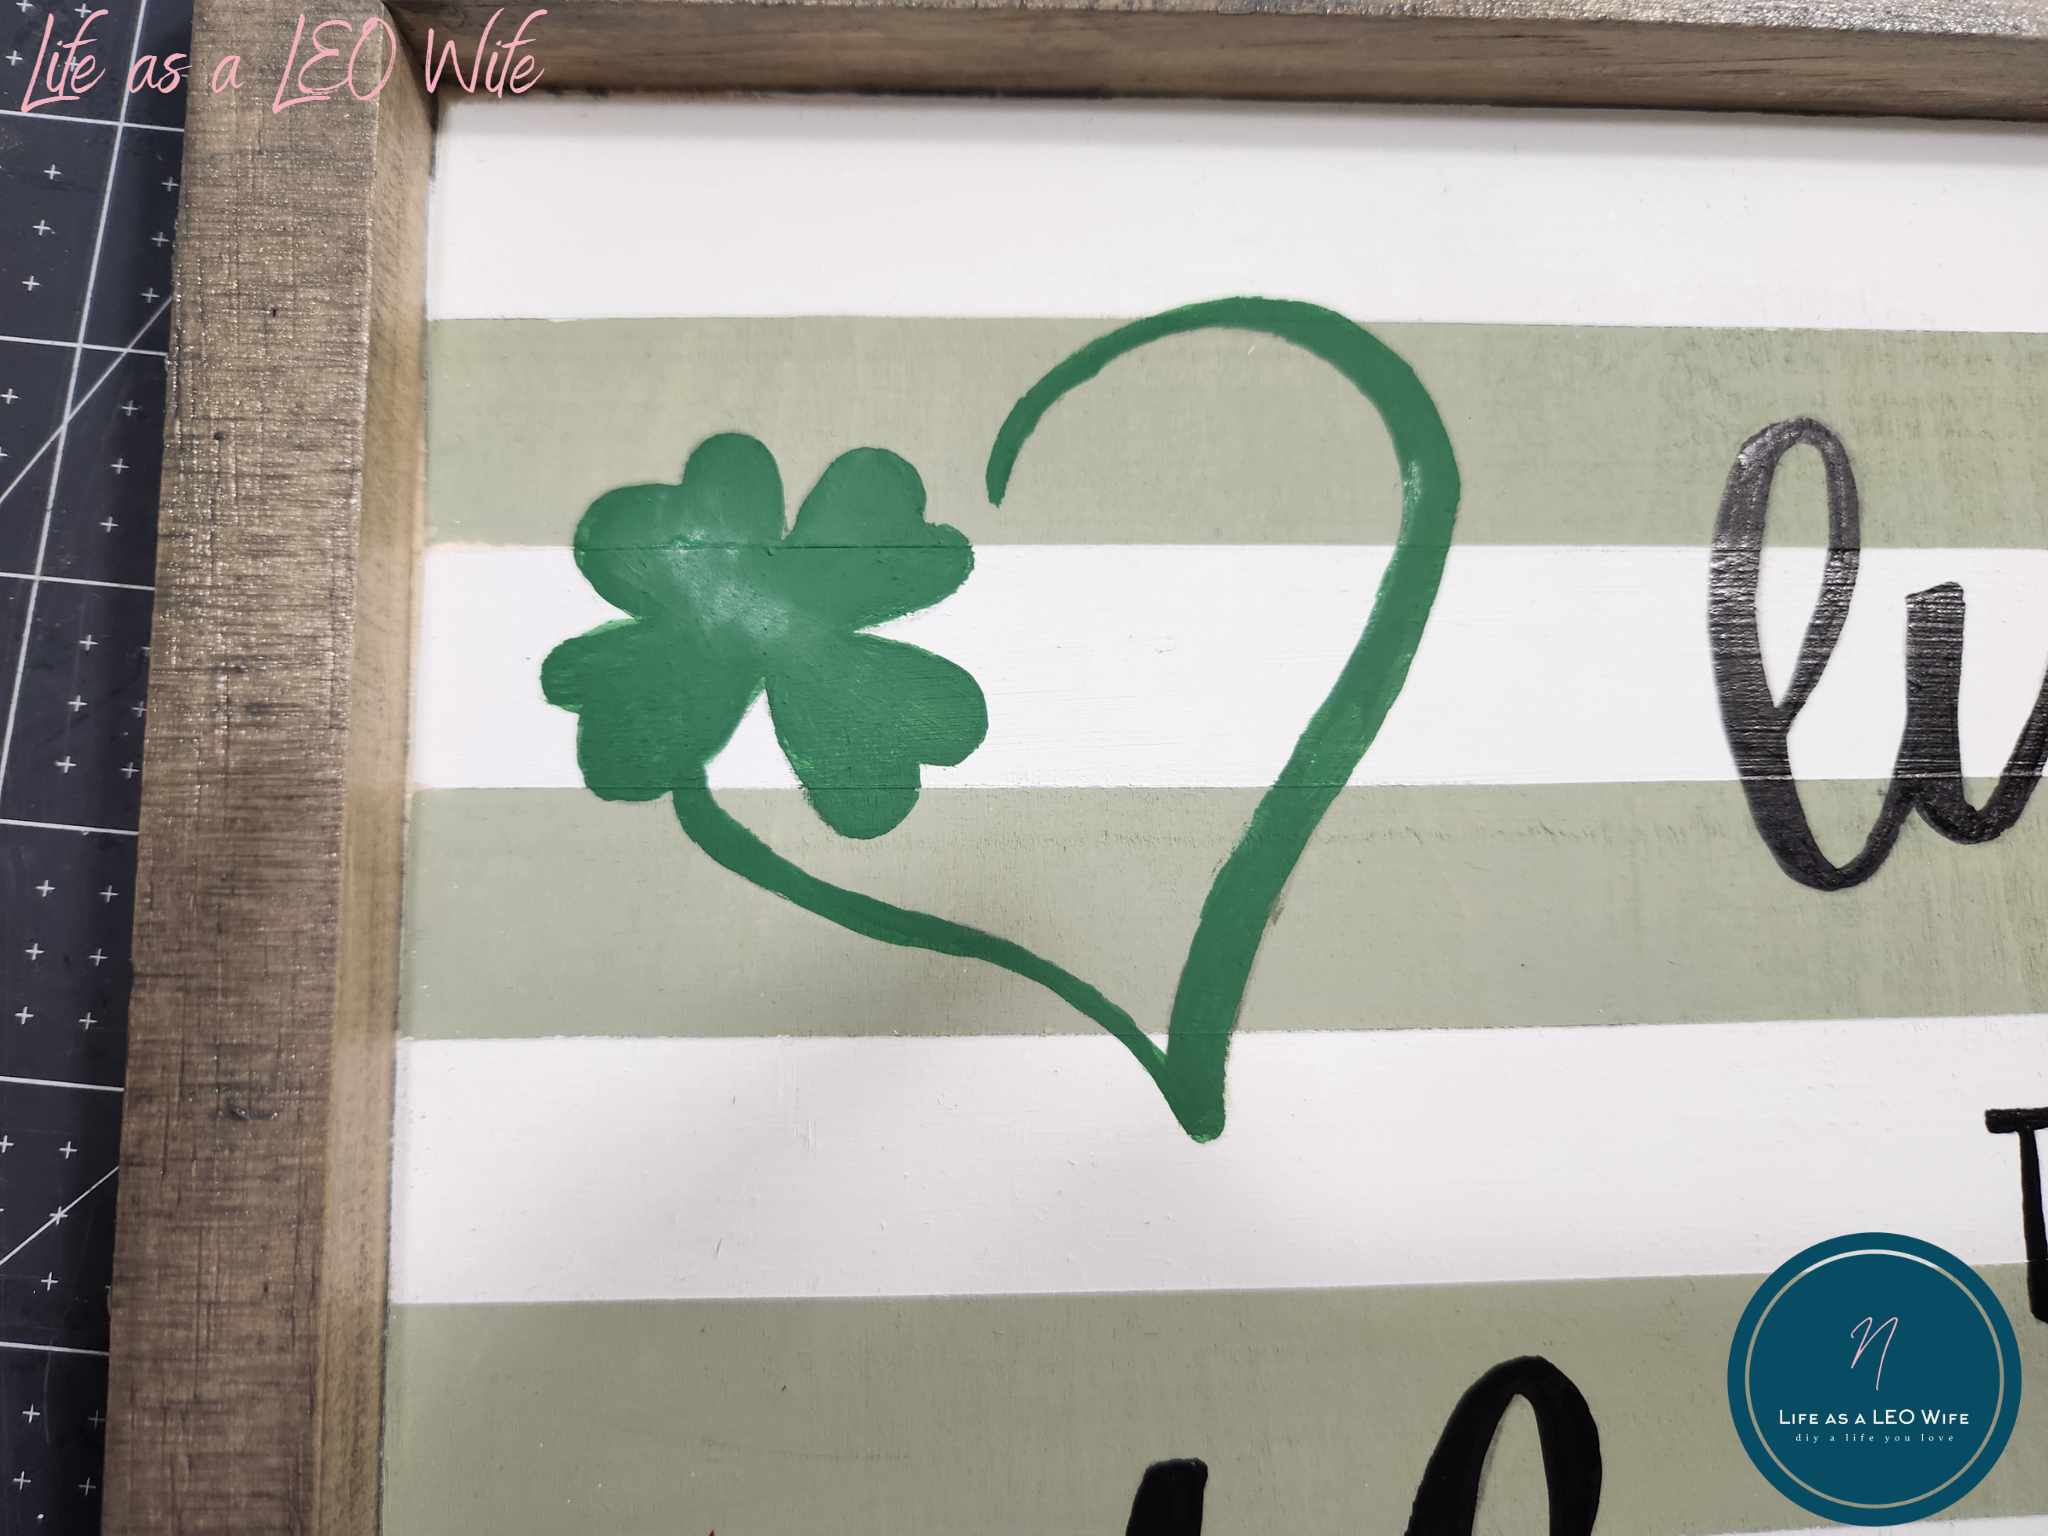 The green heart shamrock painted on my St. Patrick's Day sign.